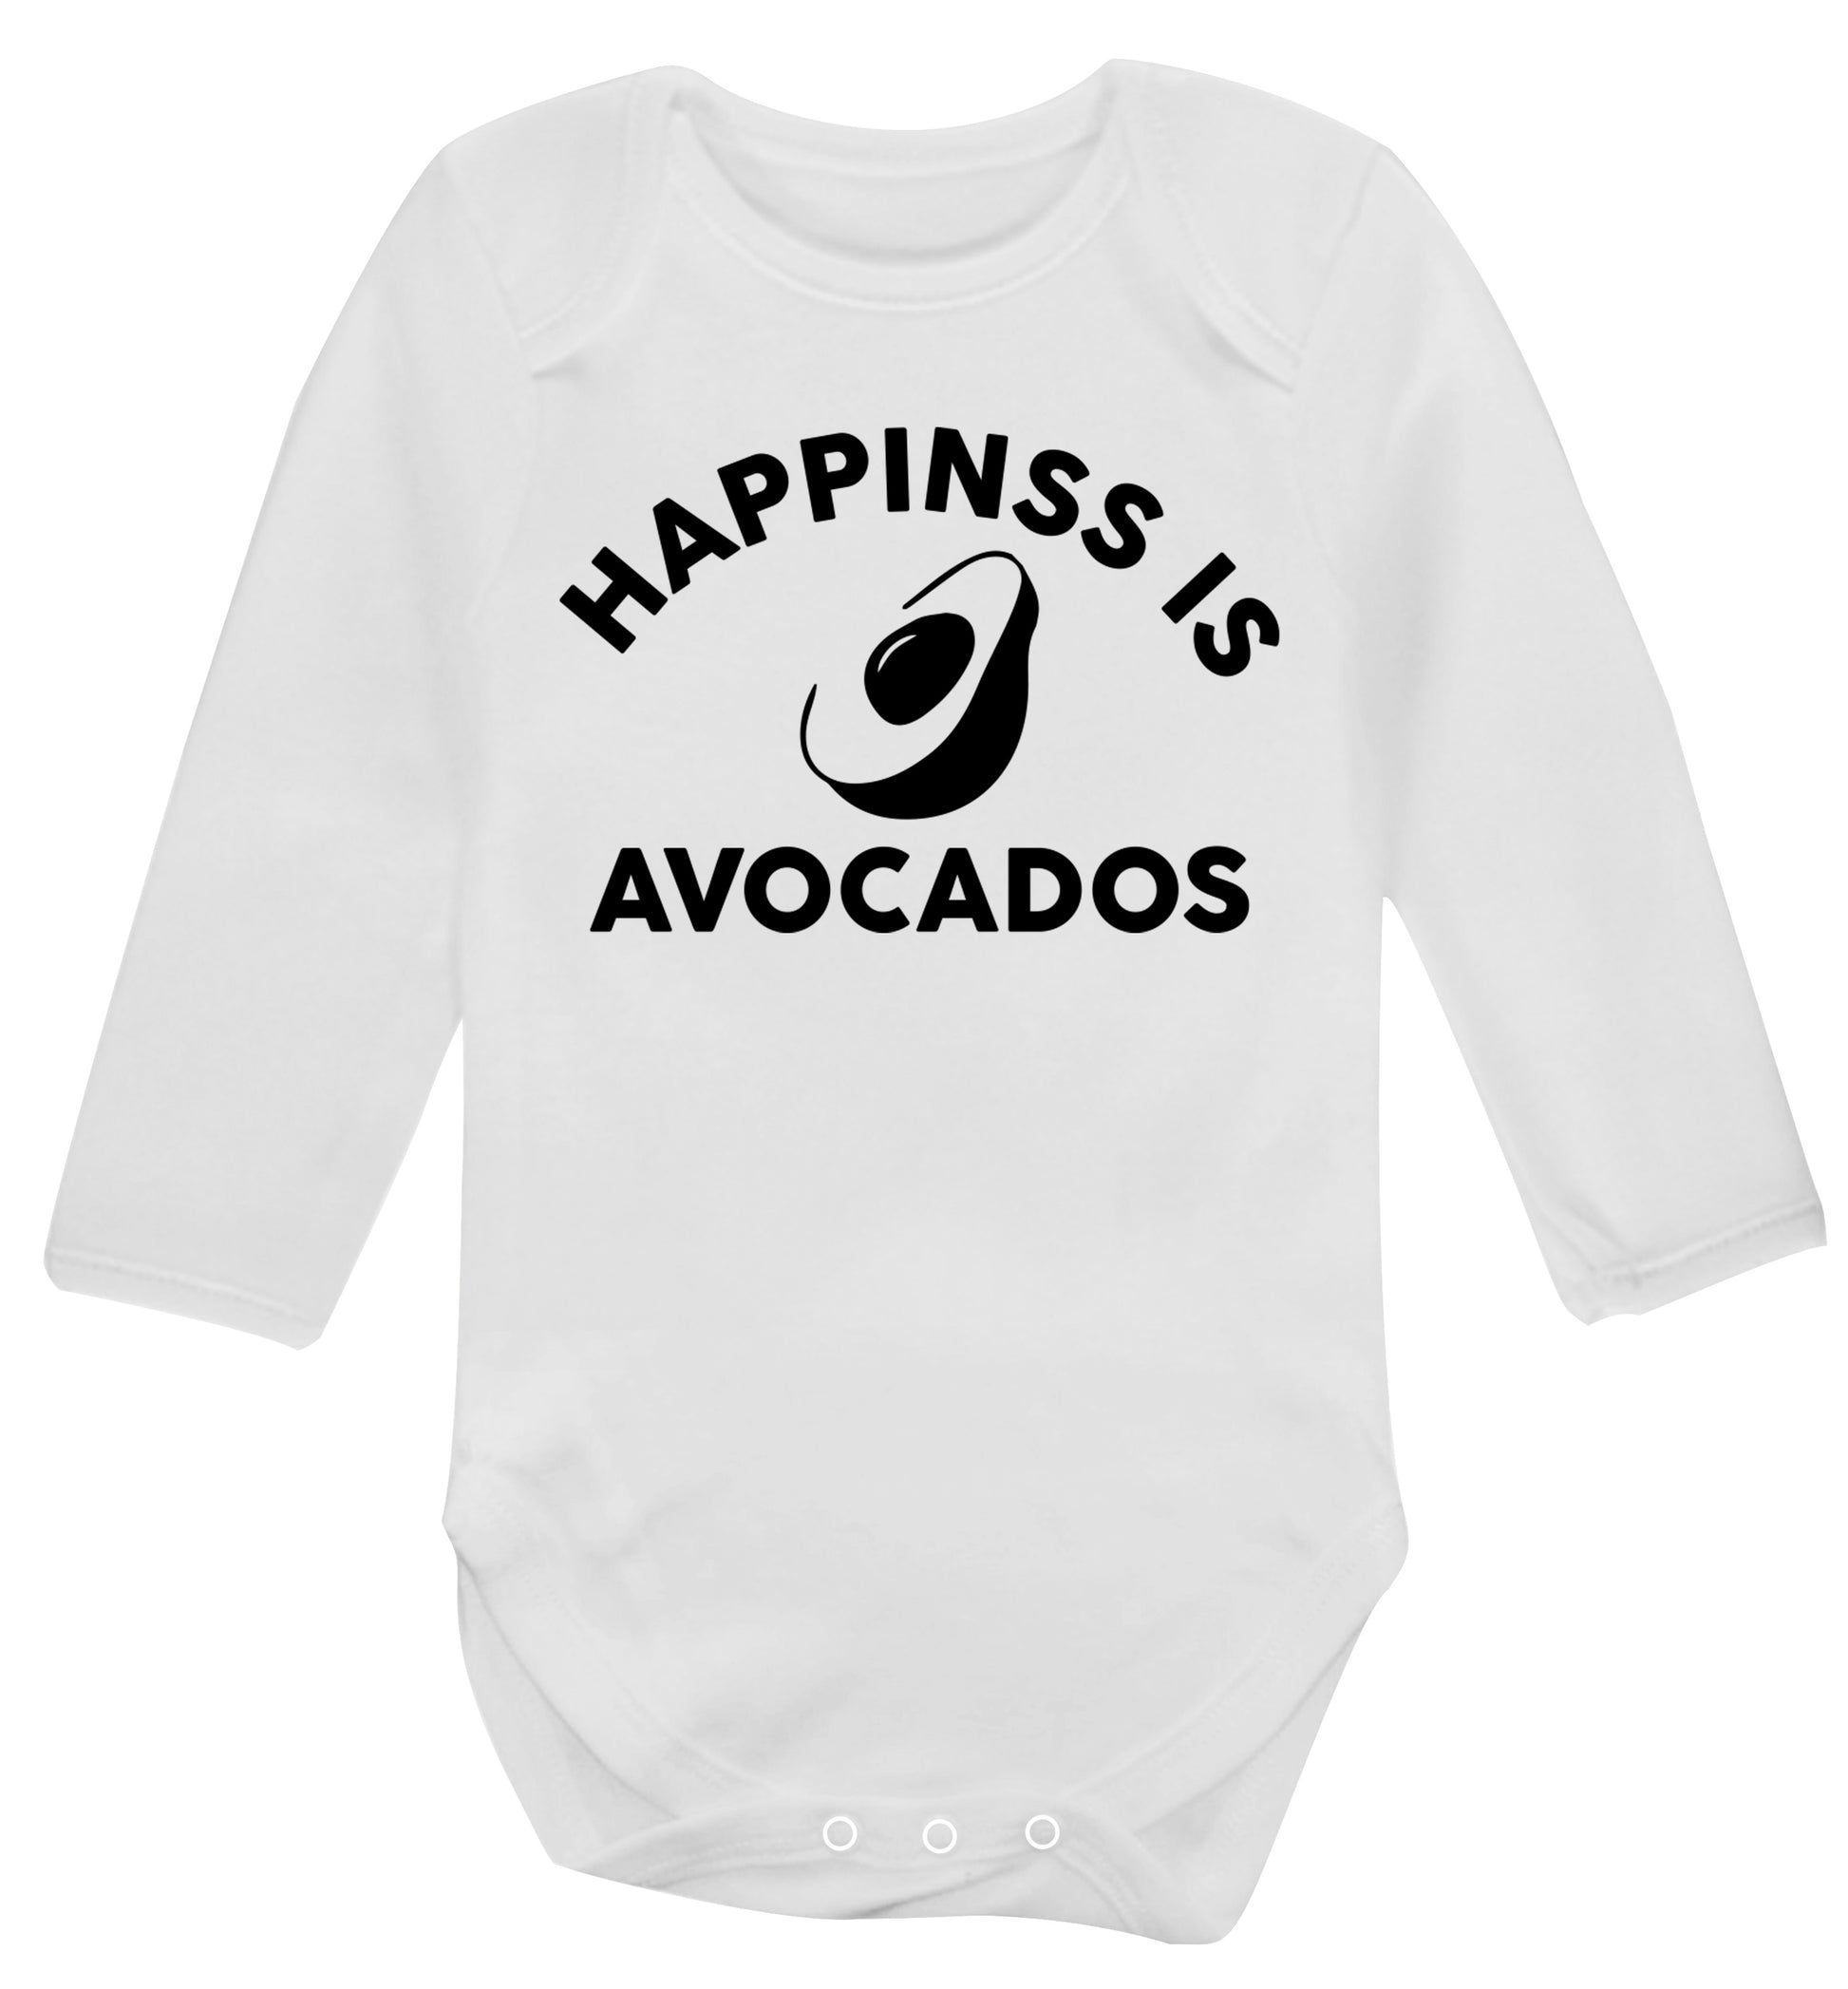 Happiness is avocados Baby Vest long sleeved white 6-12 months